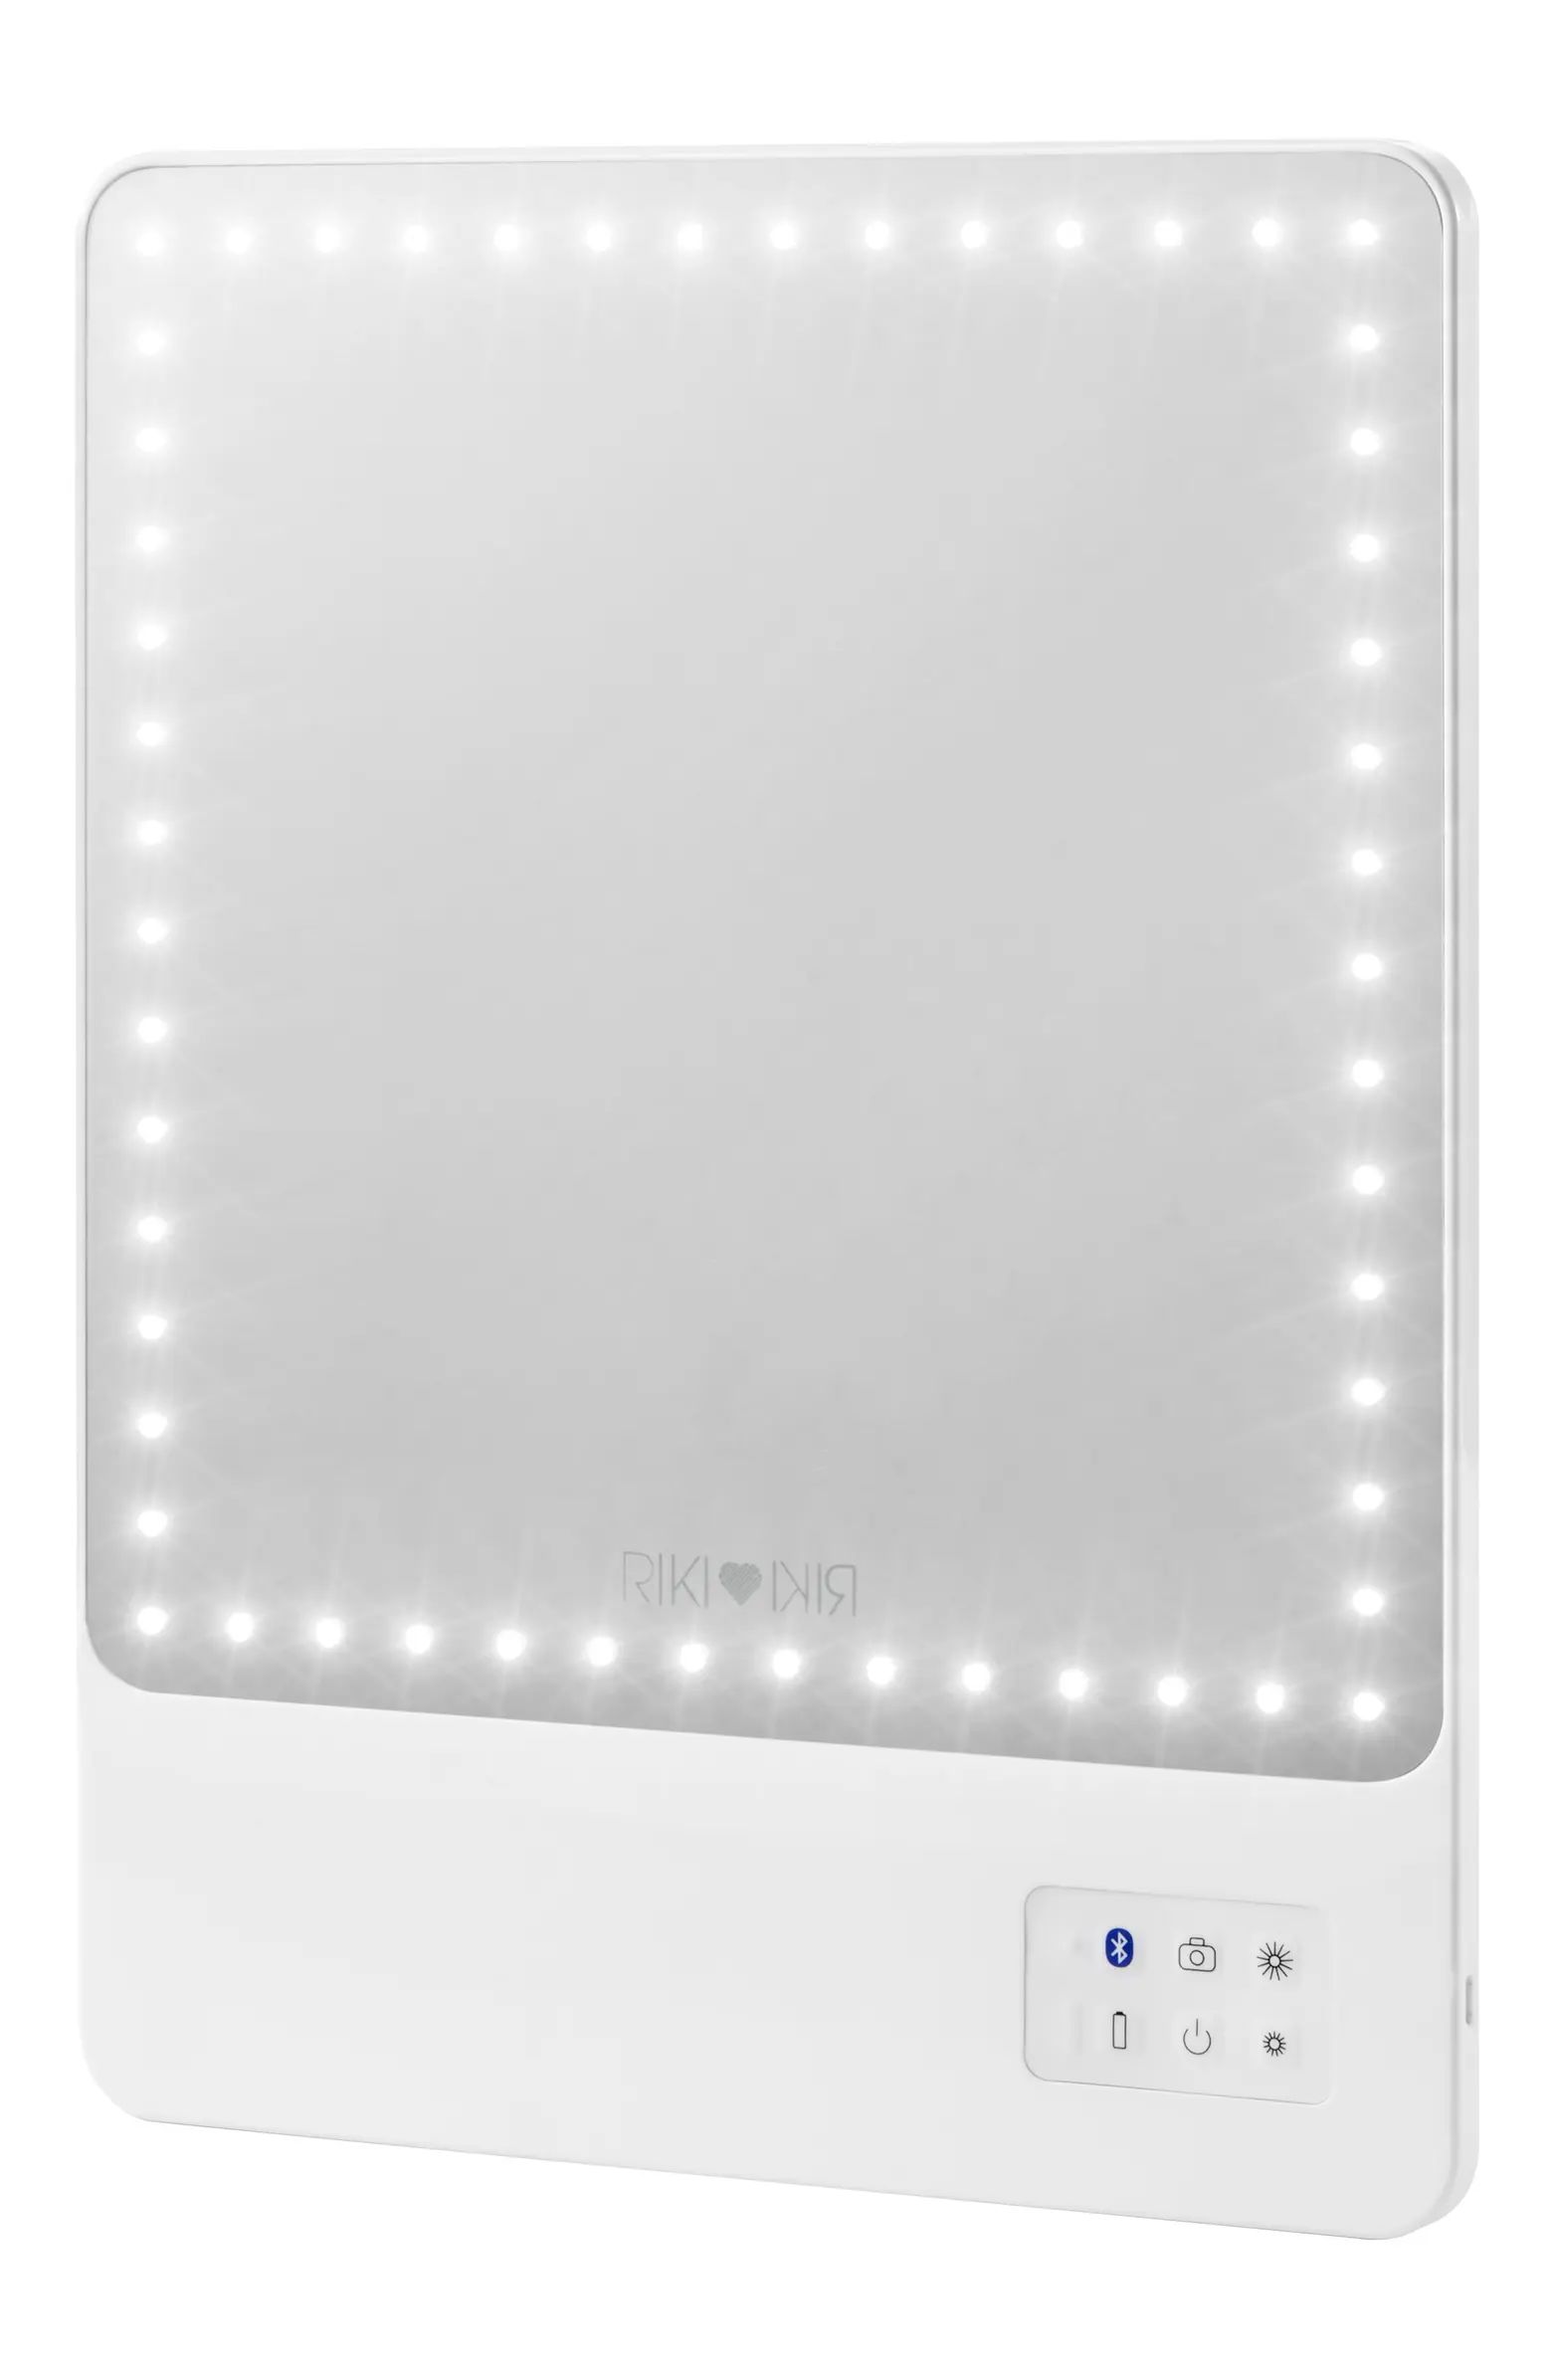 5X Skinny Lighted Mirror (Nordstrom Exclusive) $225 Value | Nordstrom